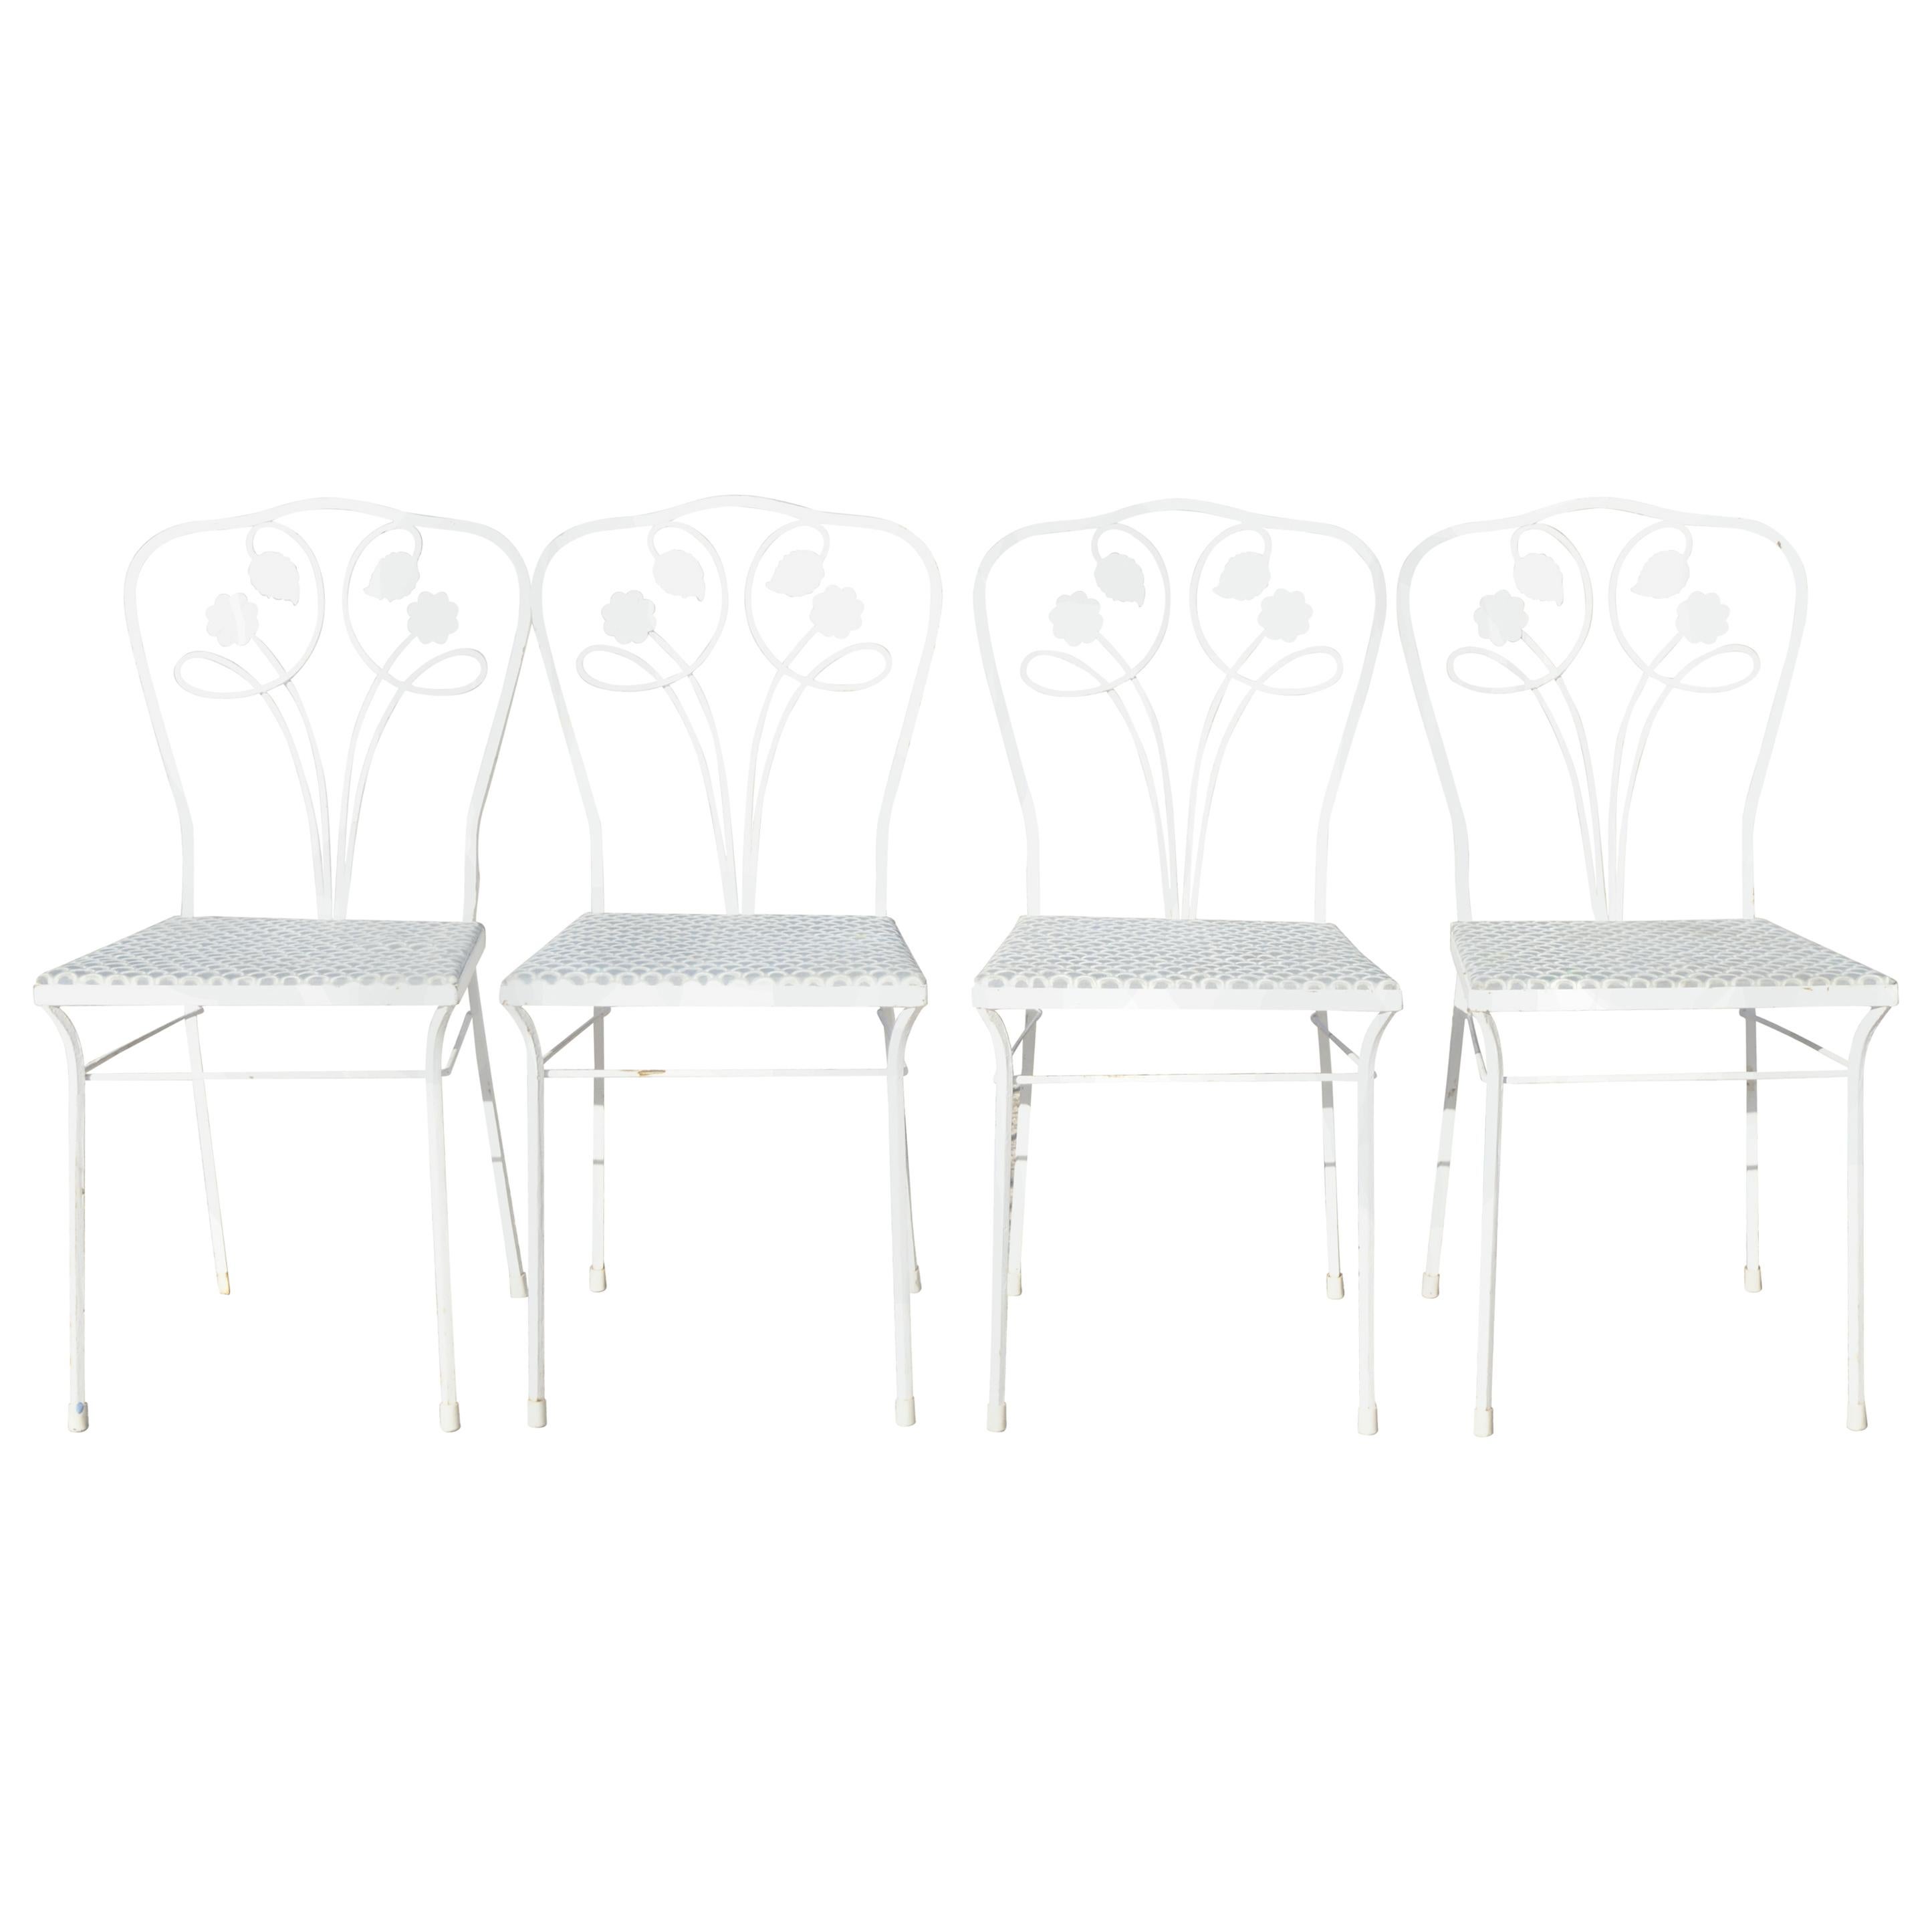 Salterini Daisy Flower Leaf Vine Wrought Iron Garden Dining Chairs, Set of 4 For Sale